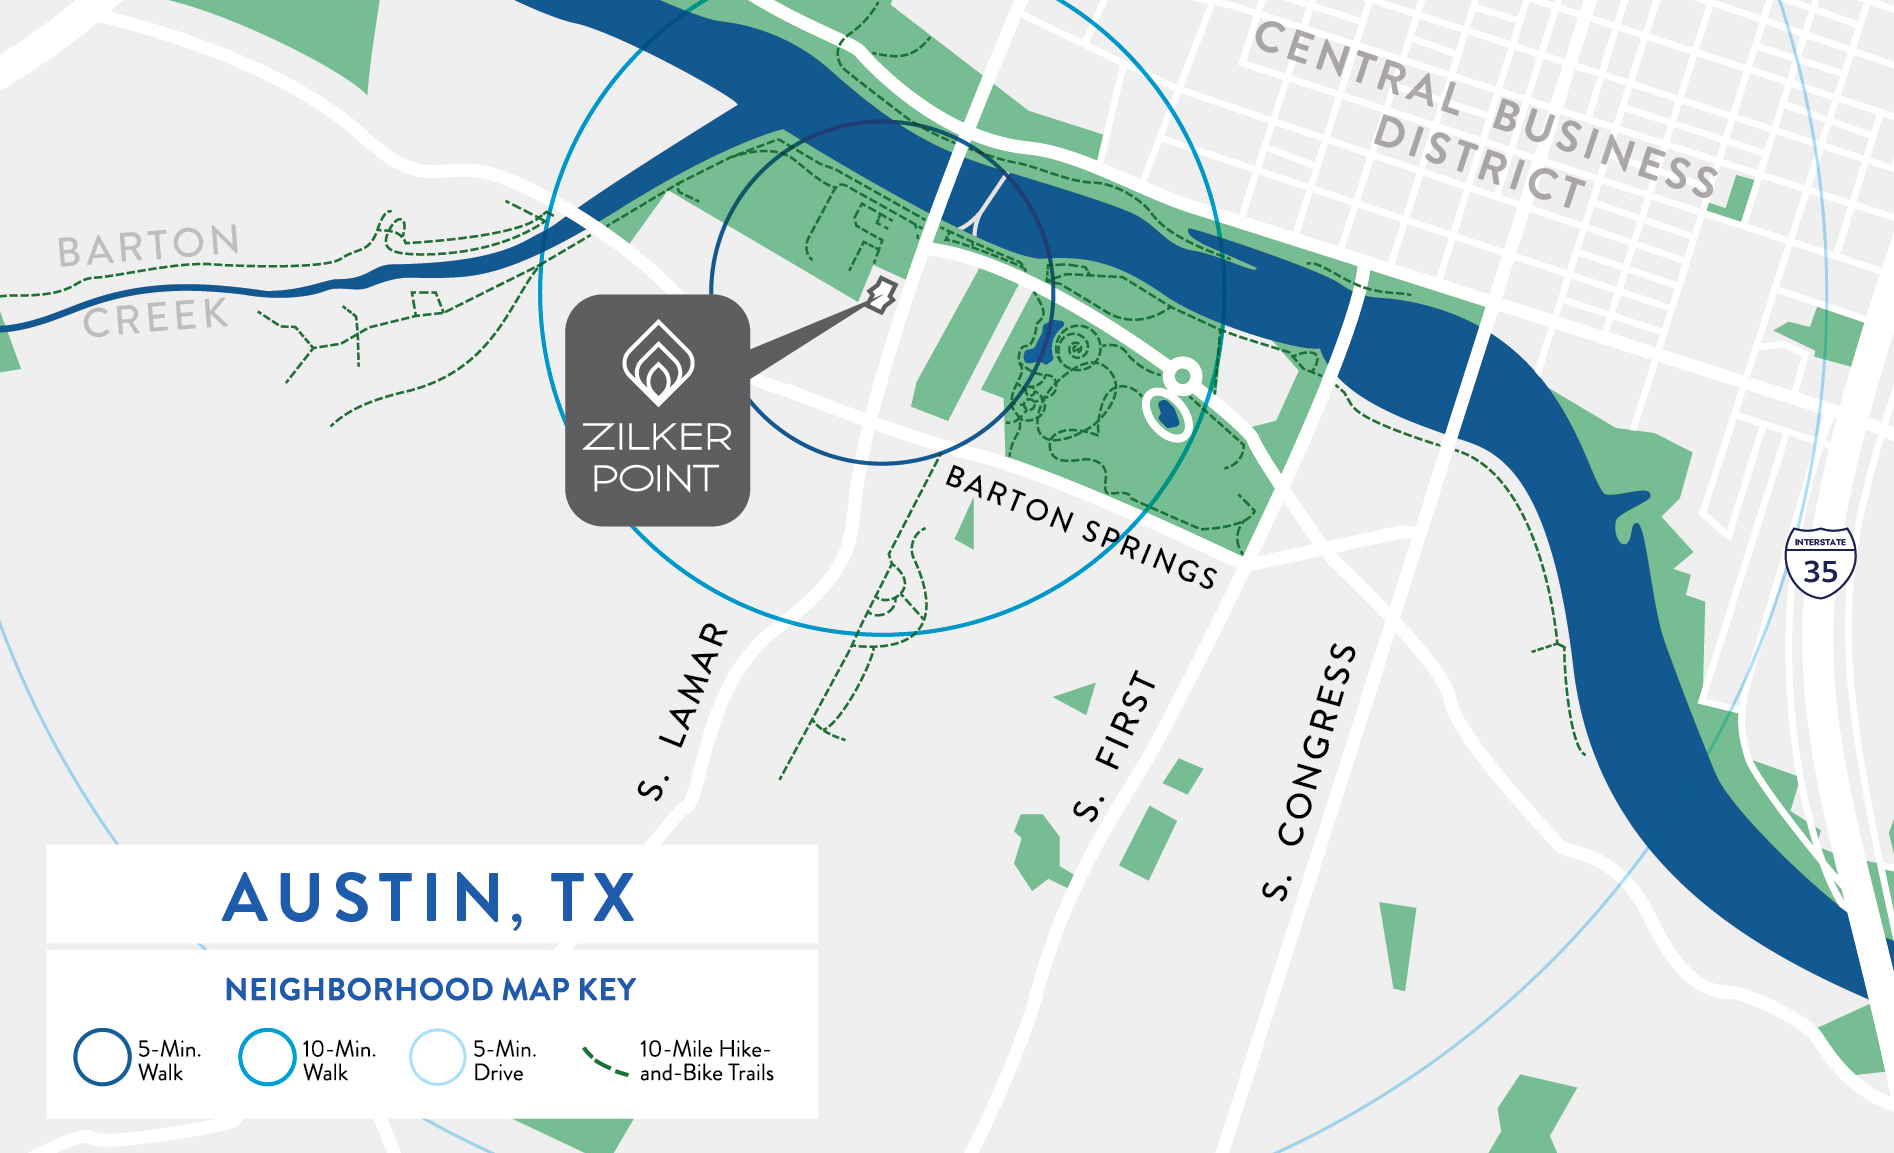 Zilker Point CBD South Area Map Zoomed